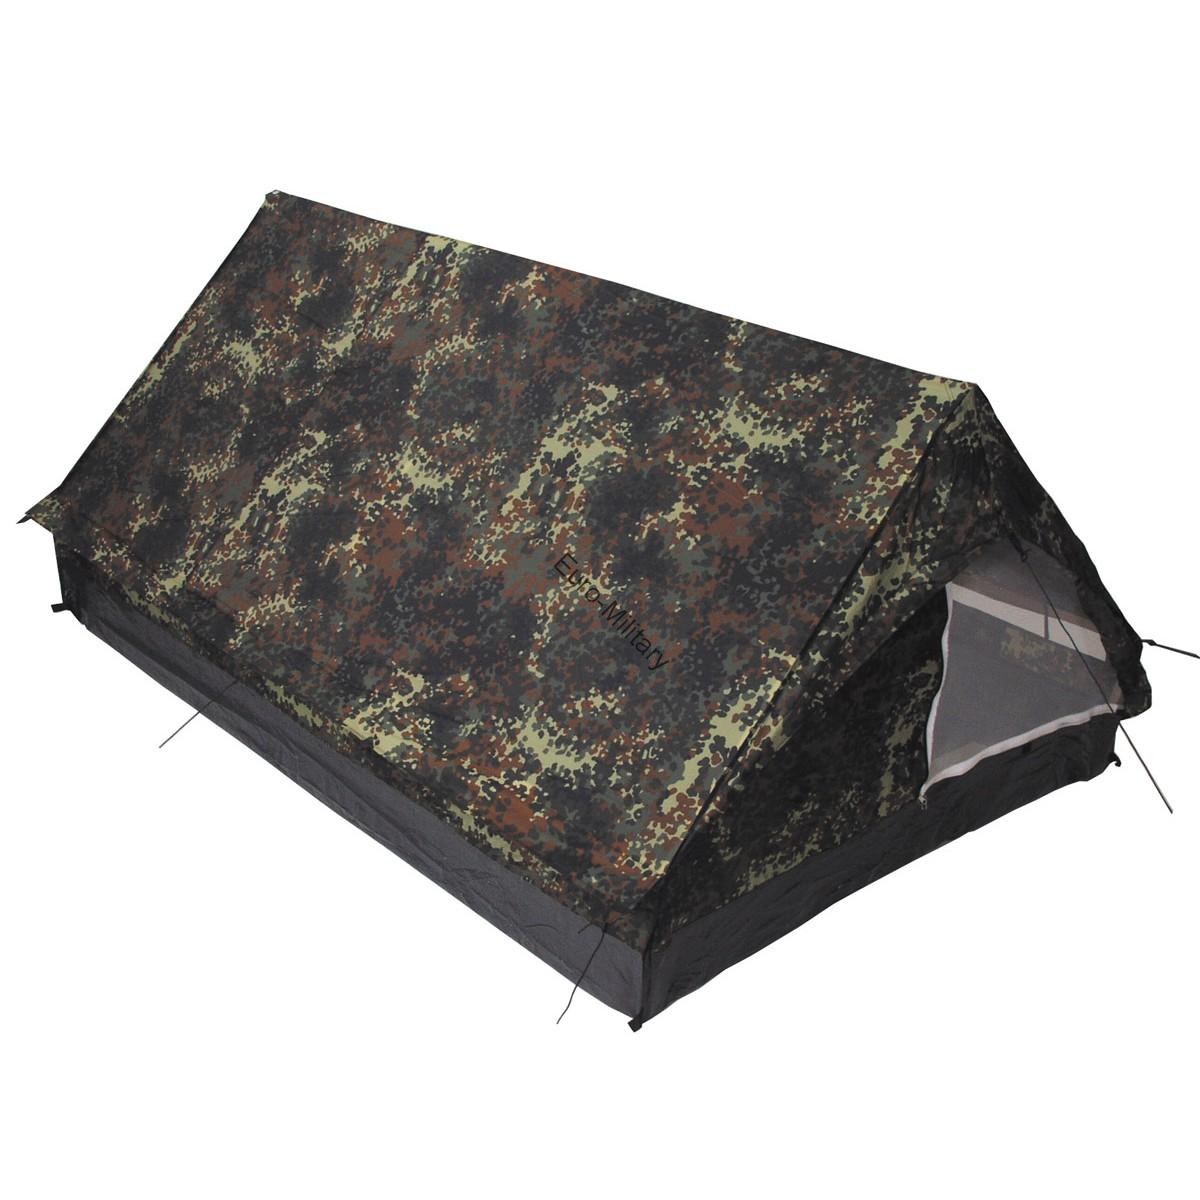 Standard Two Man Military Tactical Double Shelter - German BW Army Flectarn Camo